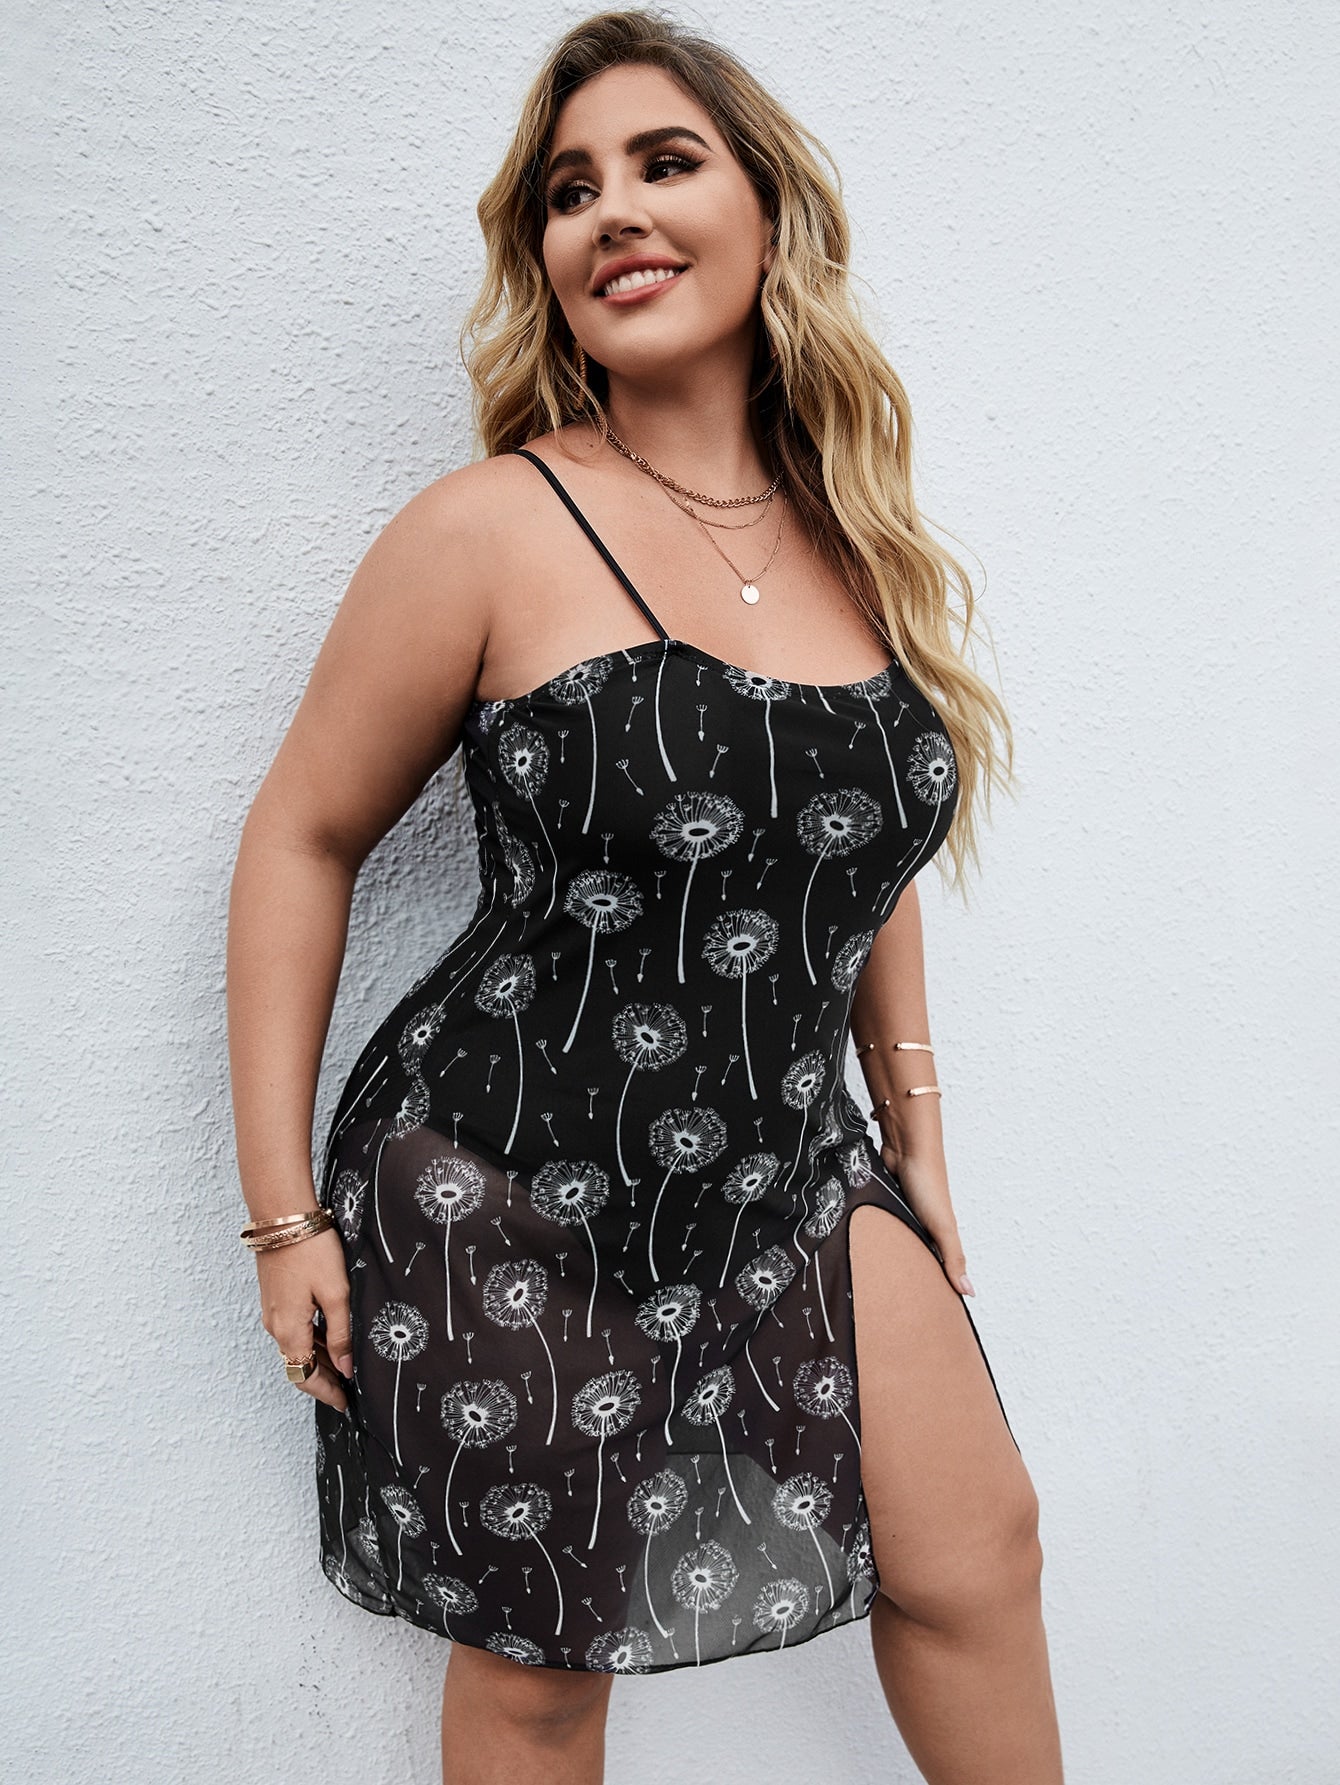 Plus Size One-Pieces Manufacturers